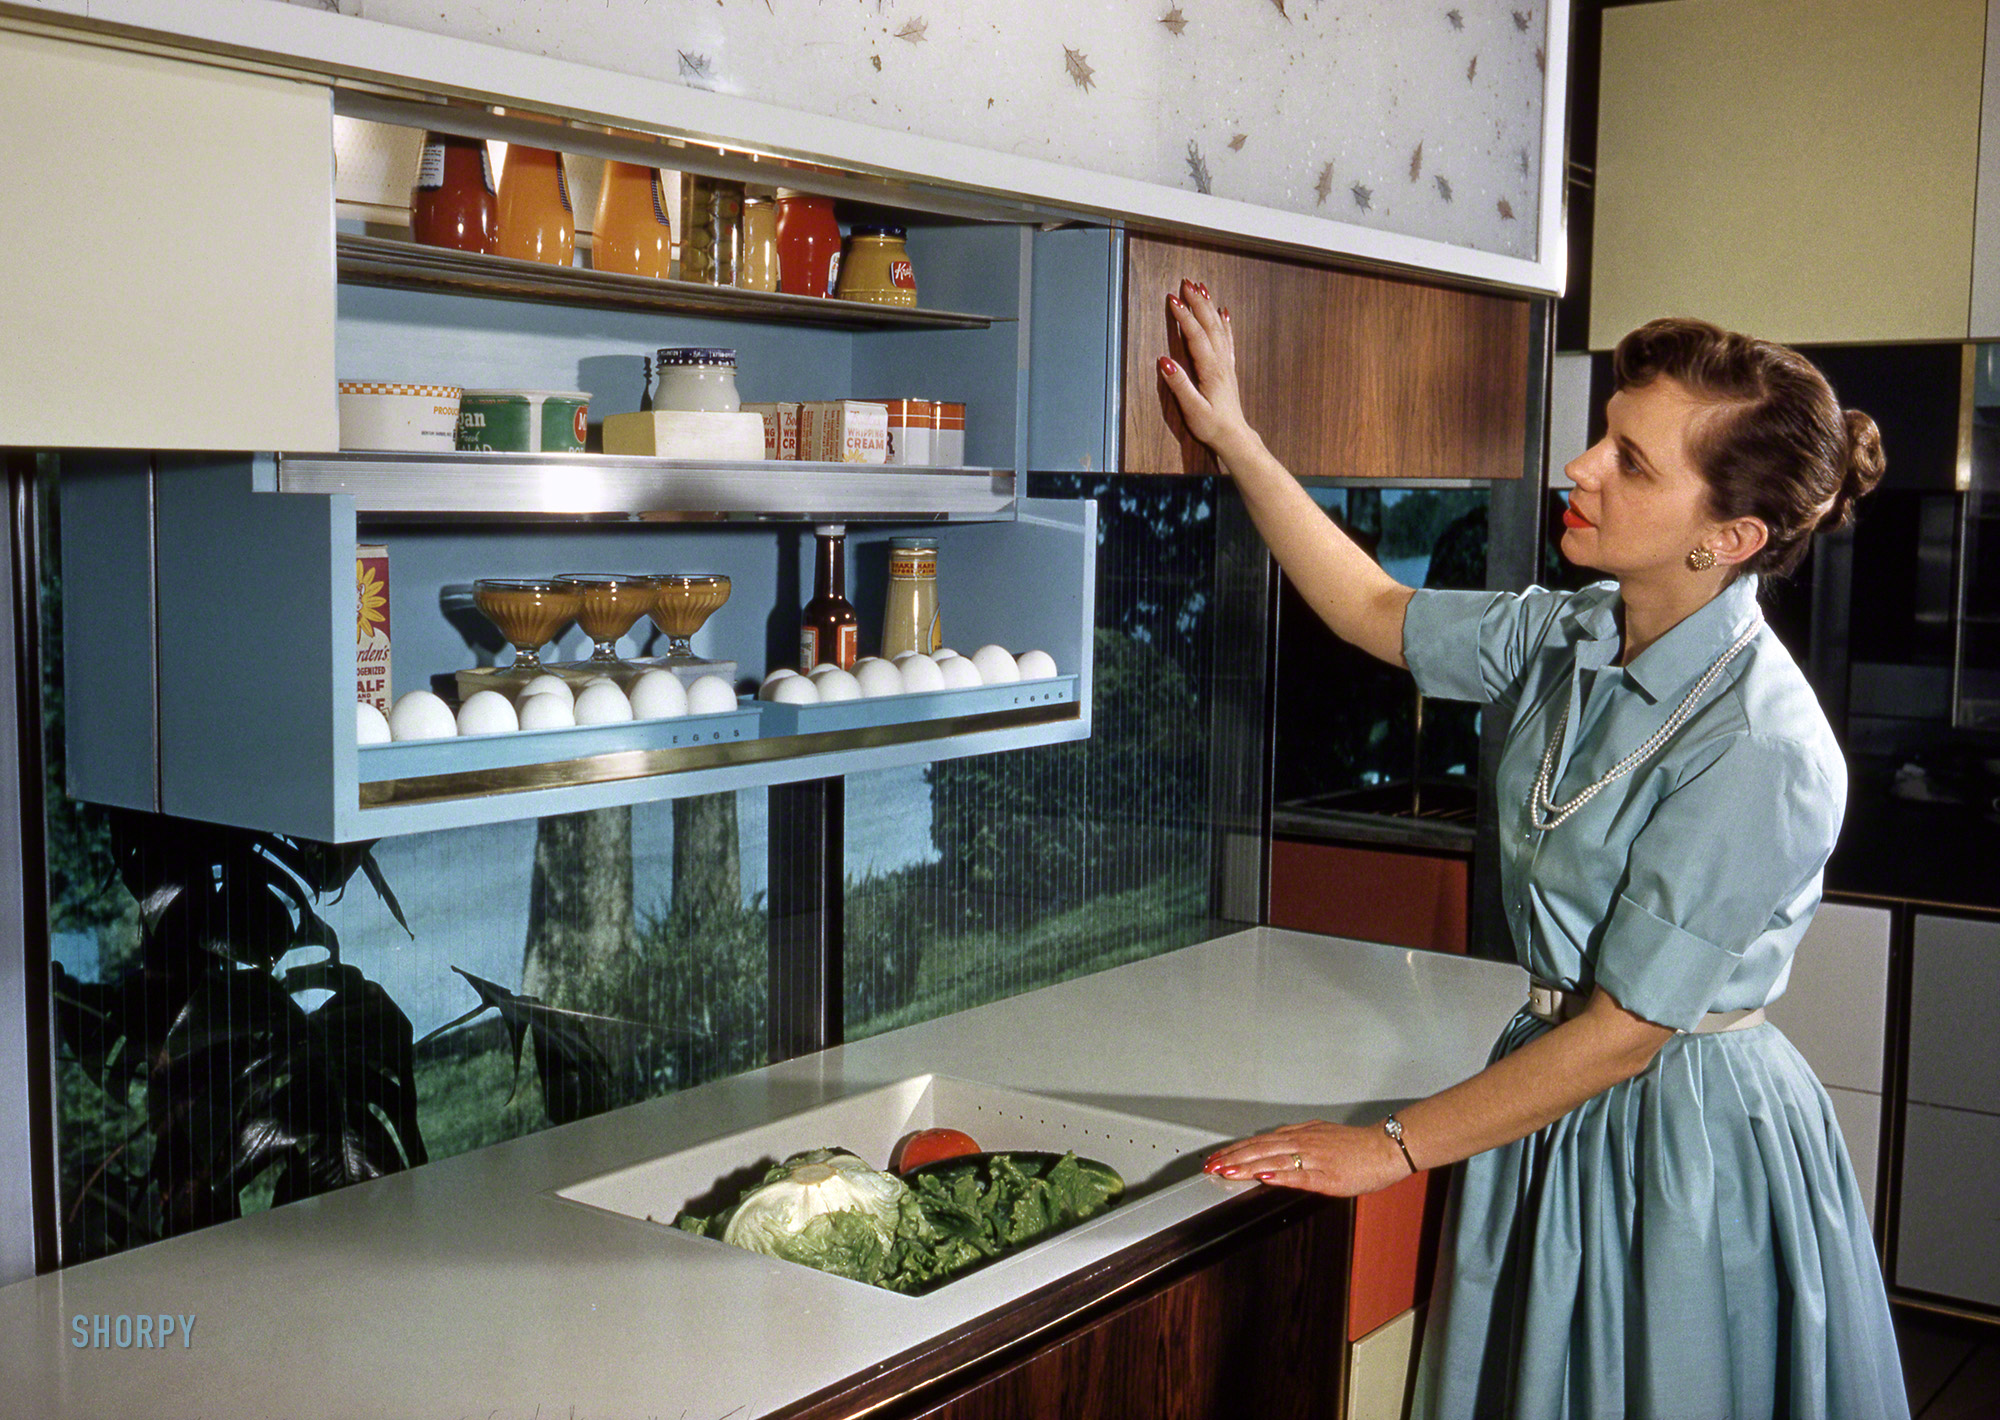 1959. "Anne Anderson in RCA-Whirlpool 'Miracle Kitchen of the Future,' a display at the American National Exhibition in Moscow." Photo by Bob Lerner for the Look magazine article "What the Russians Will See." View full size.